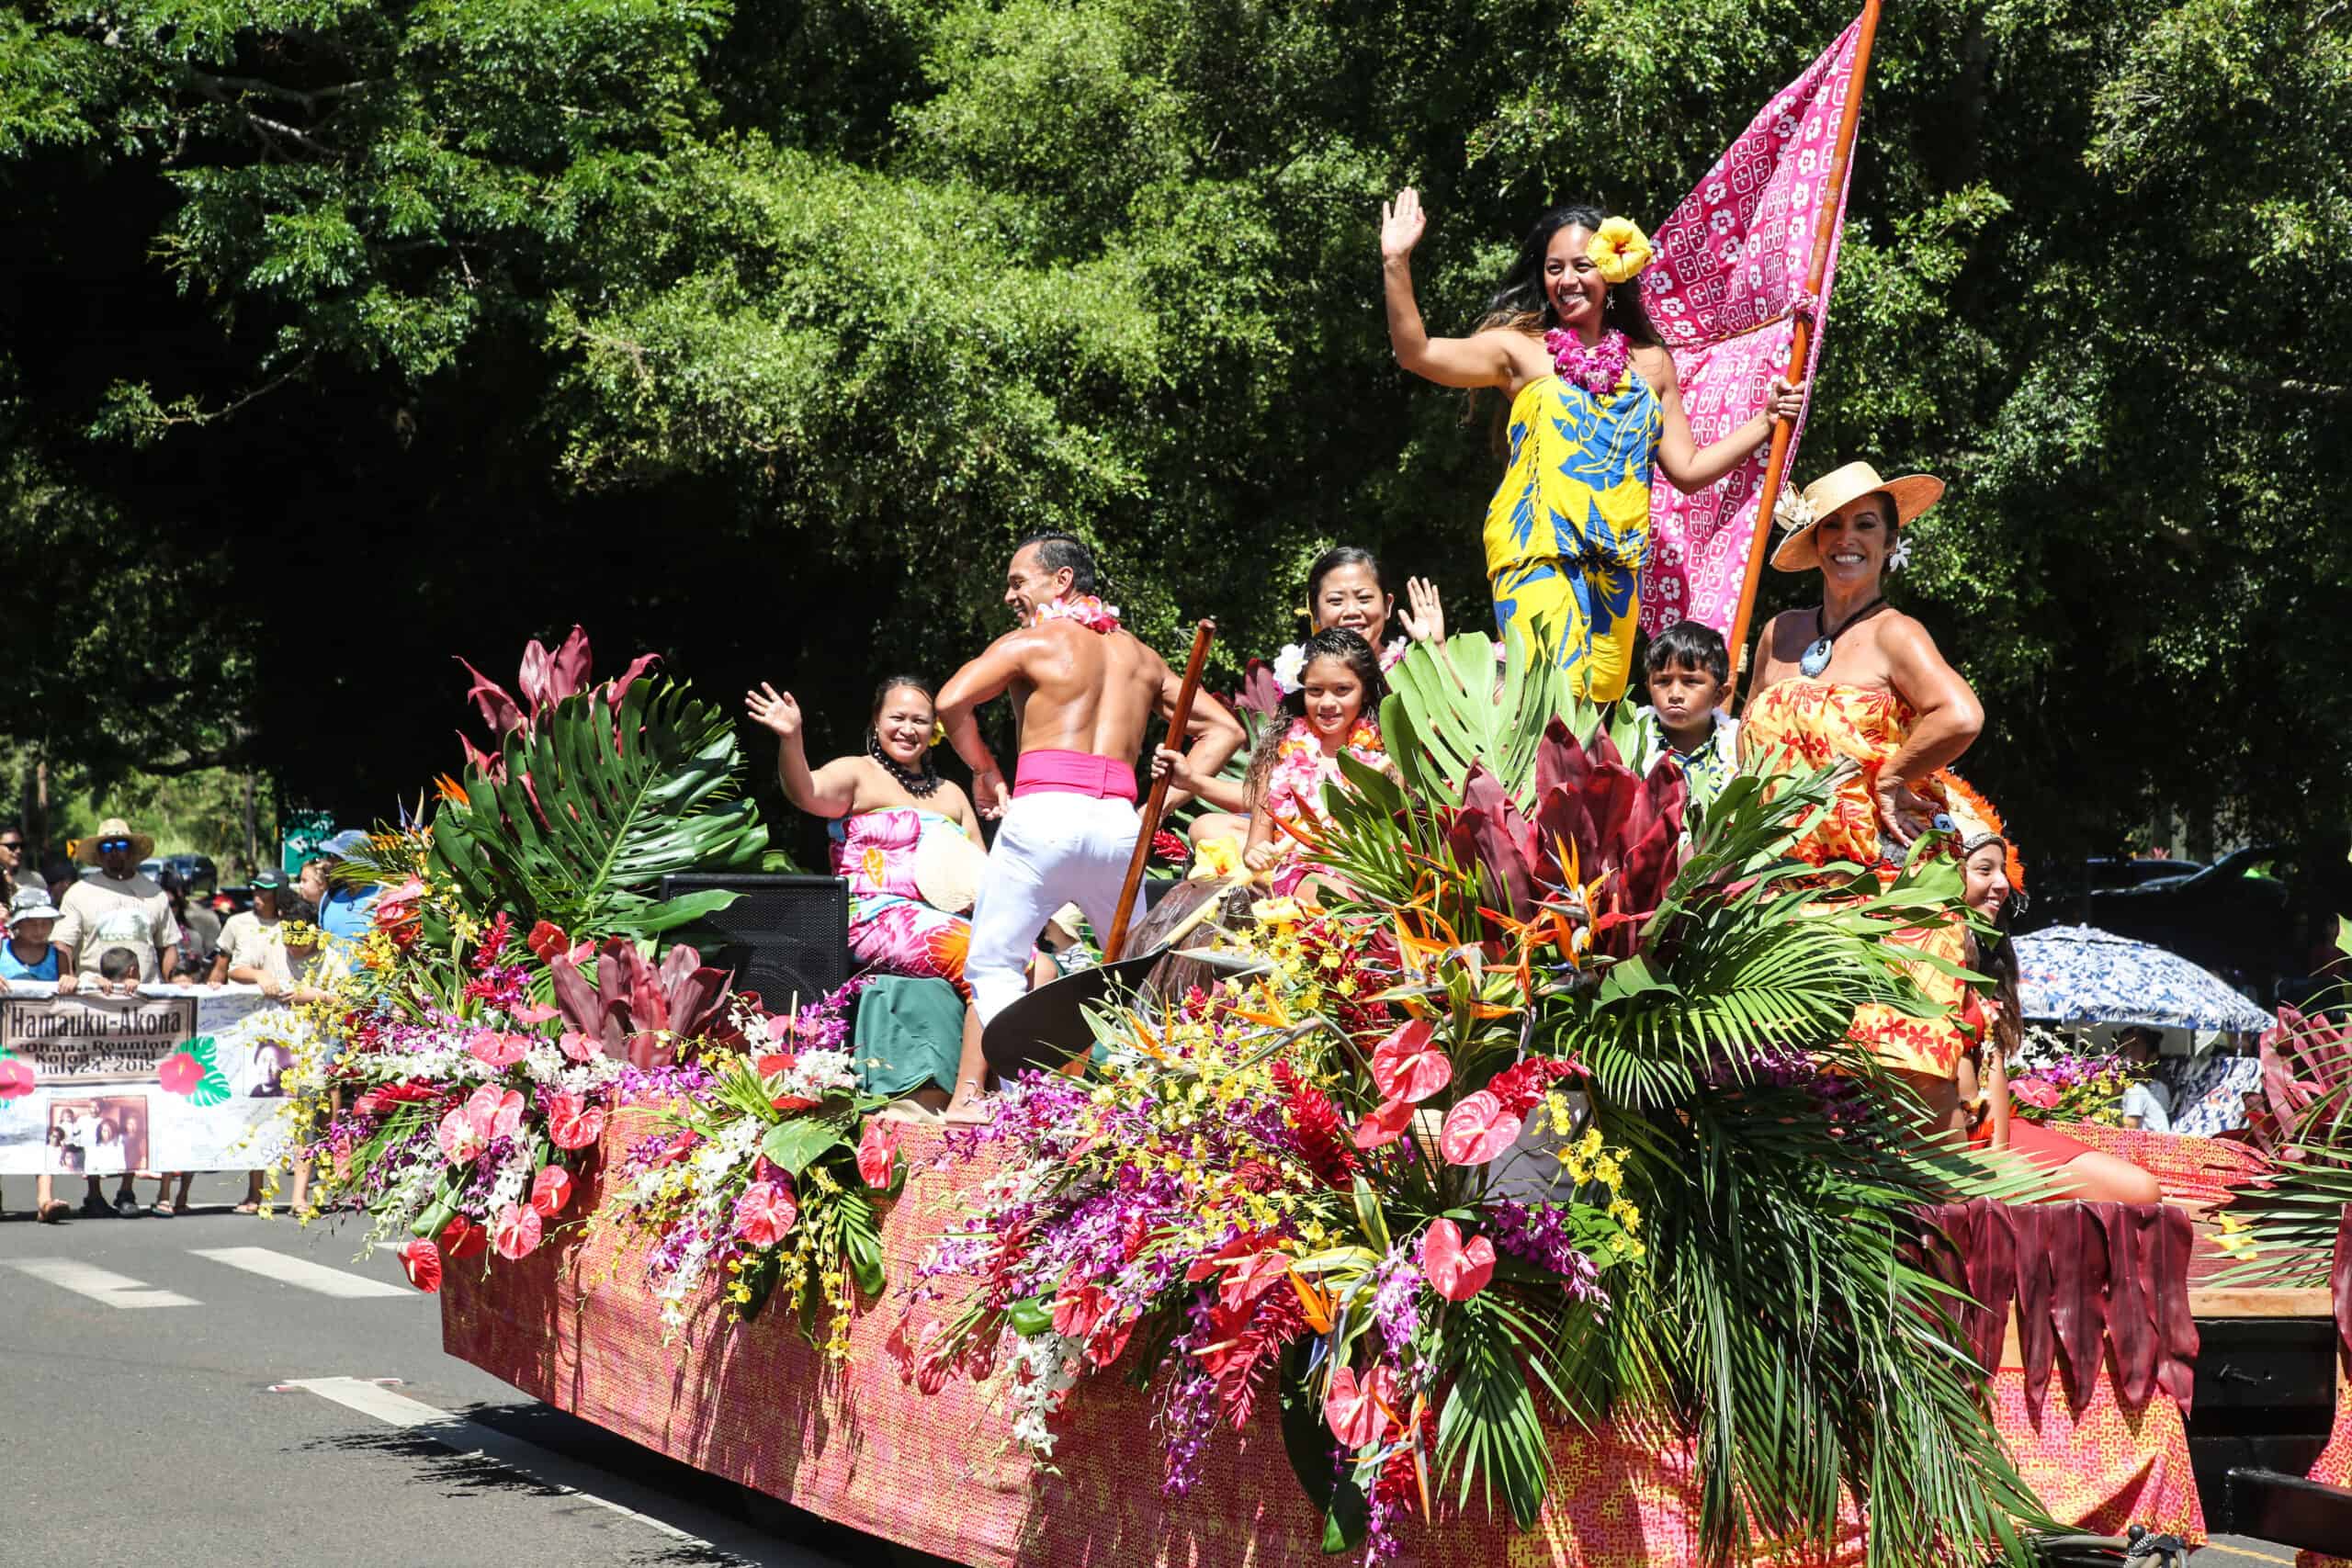 A view of the Koloa Plantation Days parade showing a colorful float.